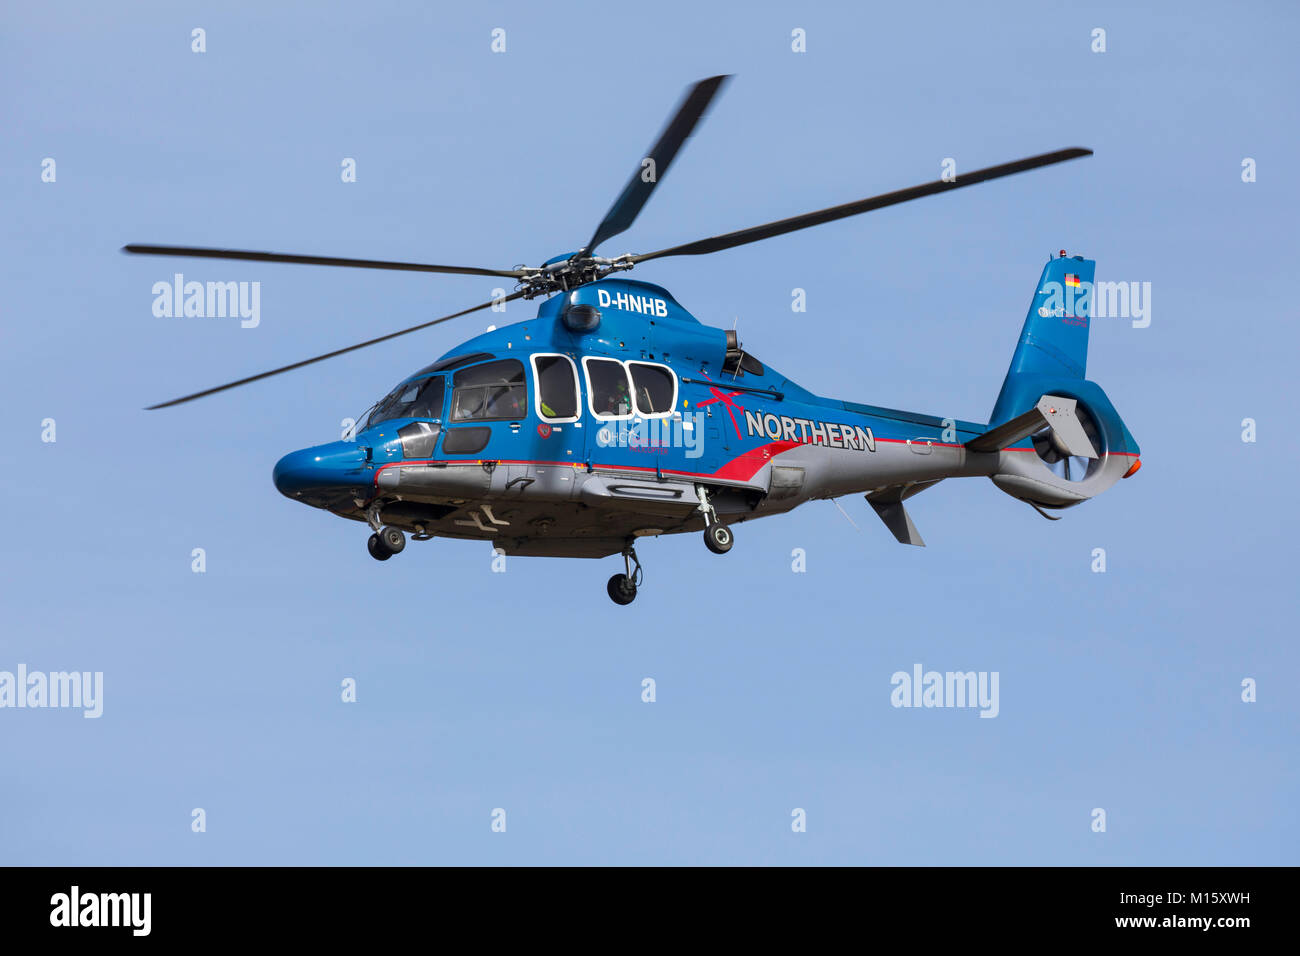 The East Frisian North Sea island Norderney, Germany,  helicopter EC 155, Northern HeliCopter, Emden, transport and ambulance helicopter, Stock Photo